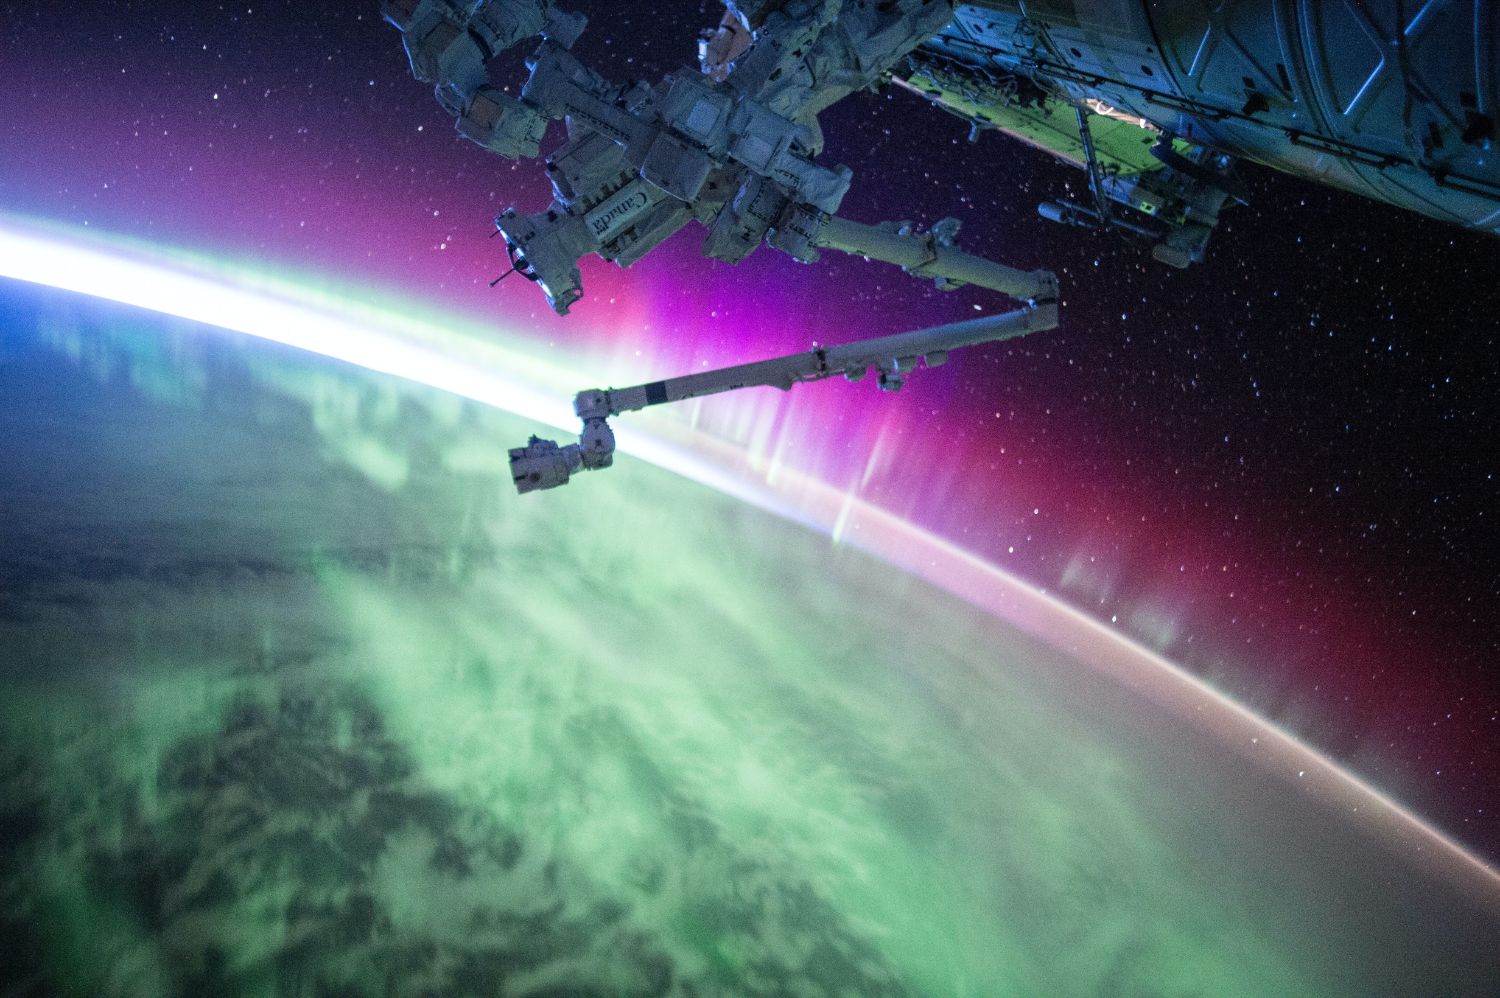 Systems engineering - NASA image of satellite with aurora borealis from space